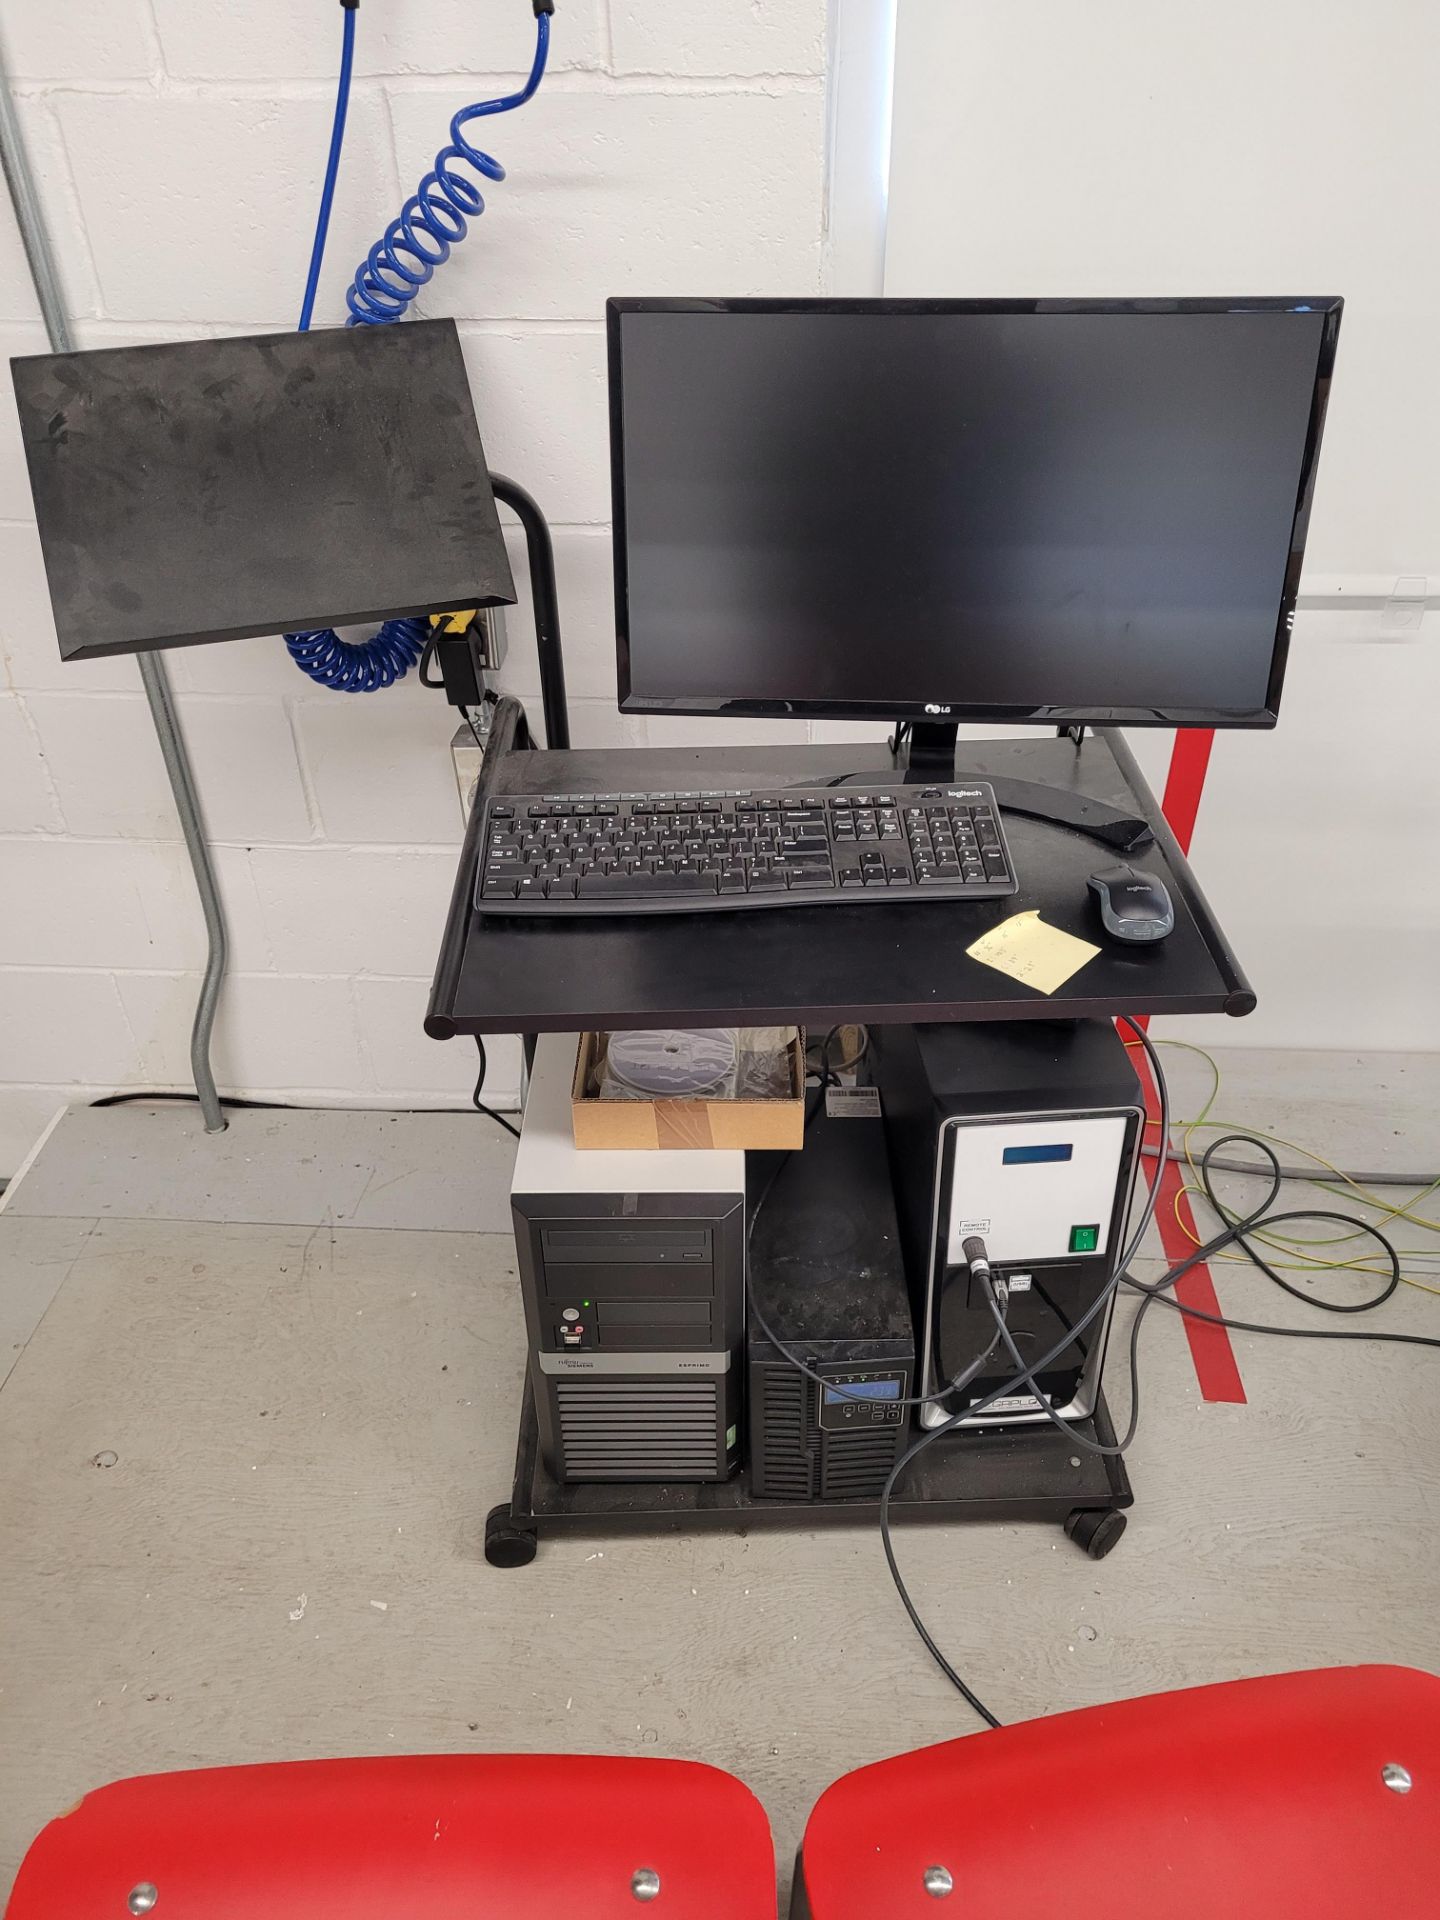 MEGAPL Styrofoam Cutter mod. Hotwire Cutting Machine, ser. 68-Z017USB-C, with controller and accesso - Image 14 of 23